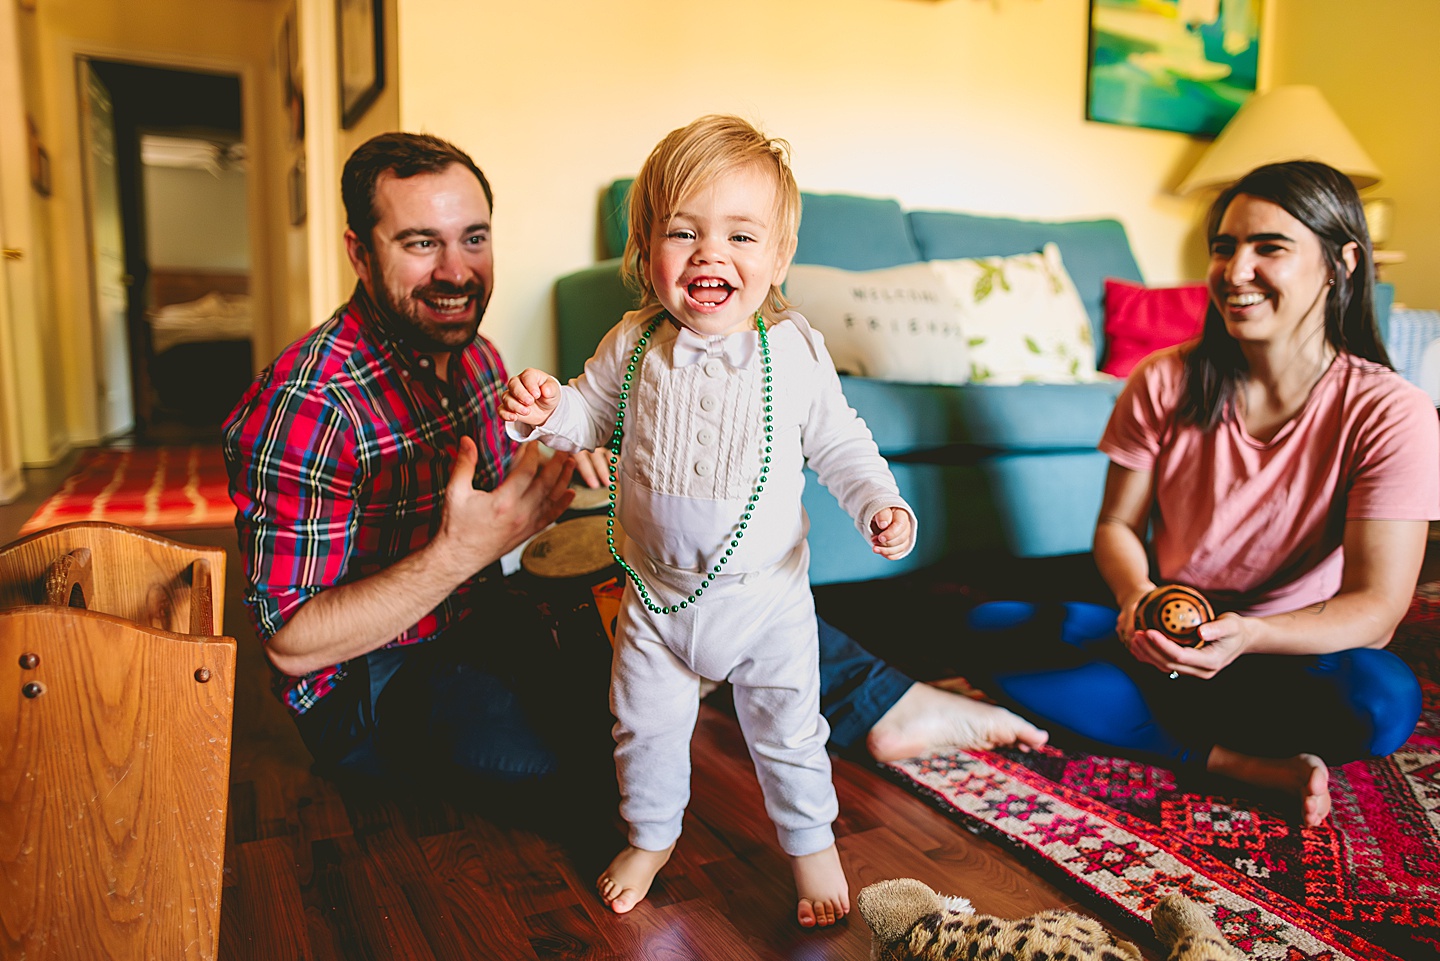 Toddler dancing and smiling in living room family photos